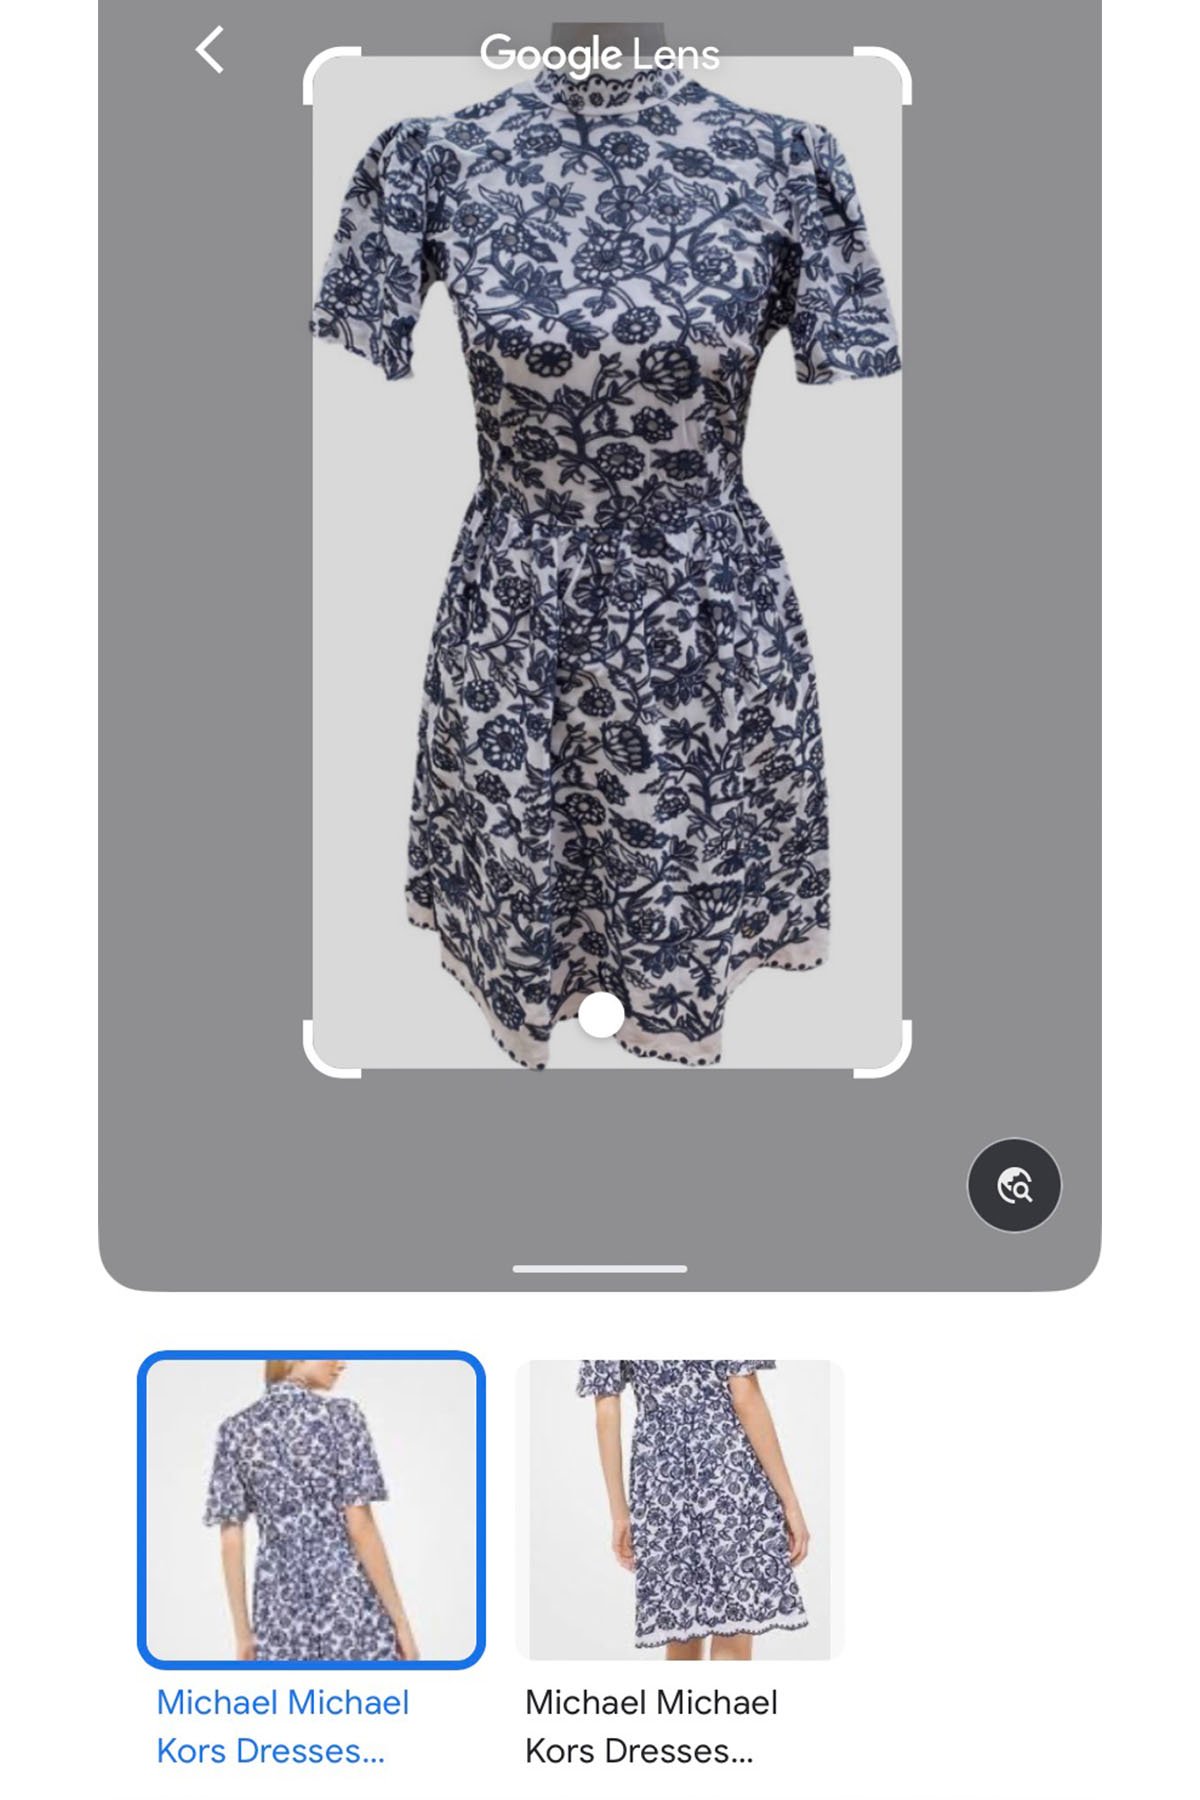 a blue and white floral michael kors dress being searched on google lens.